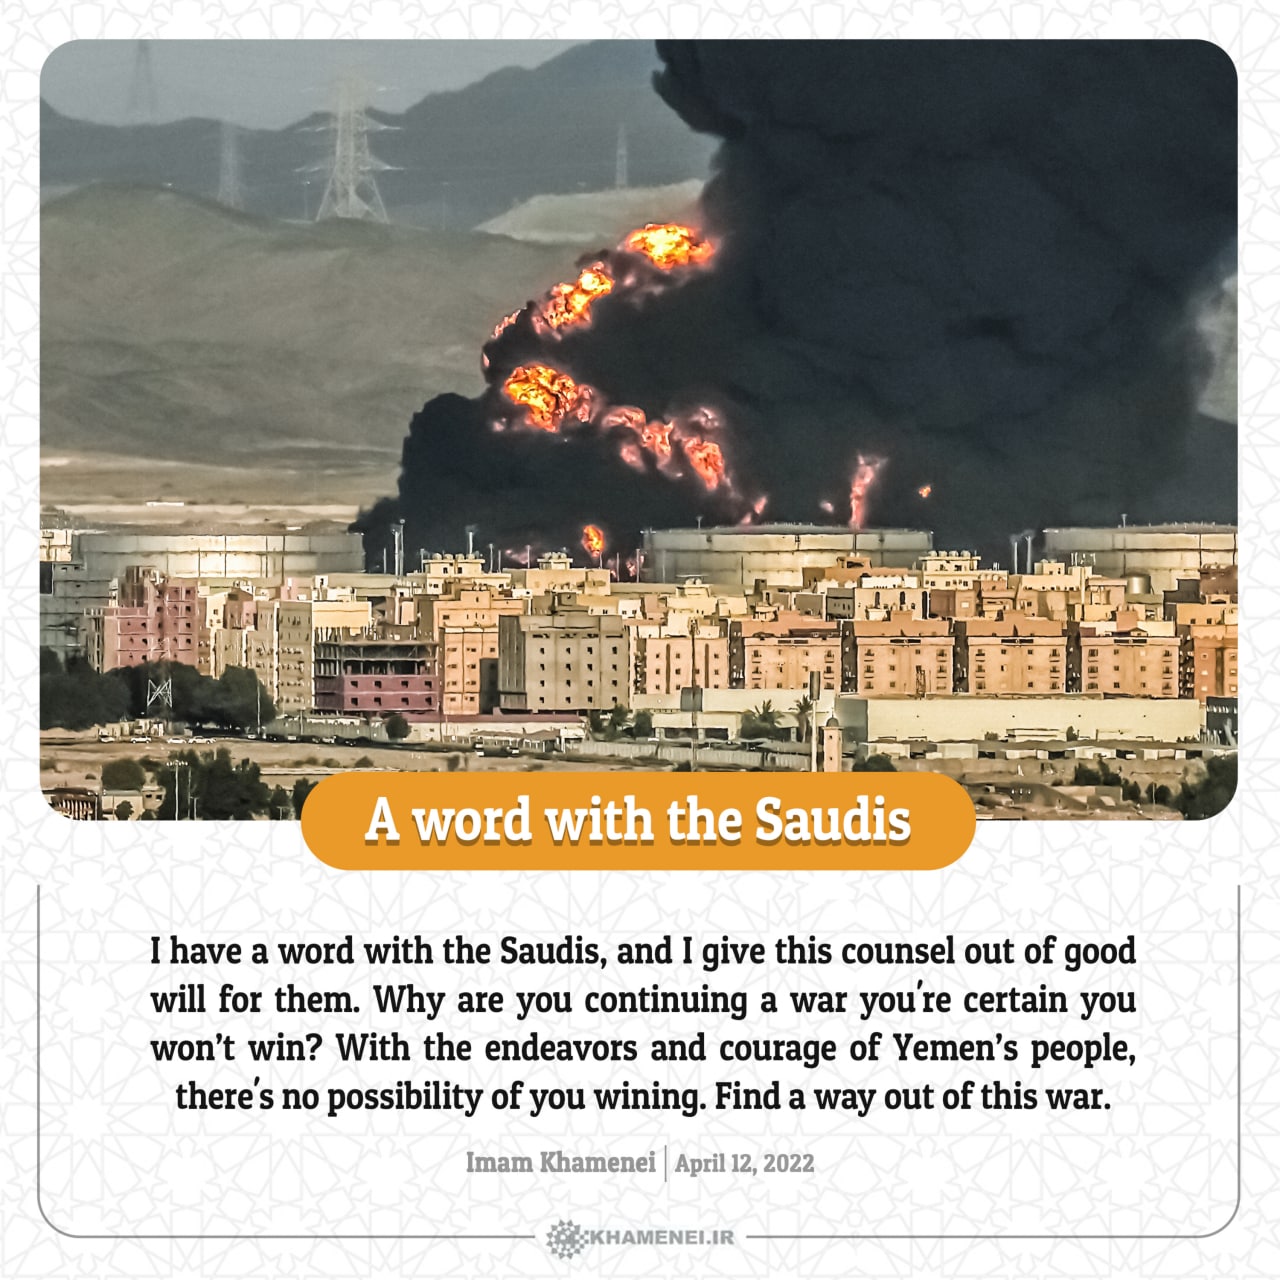 A word with the Saudis